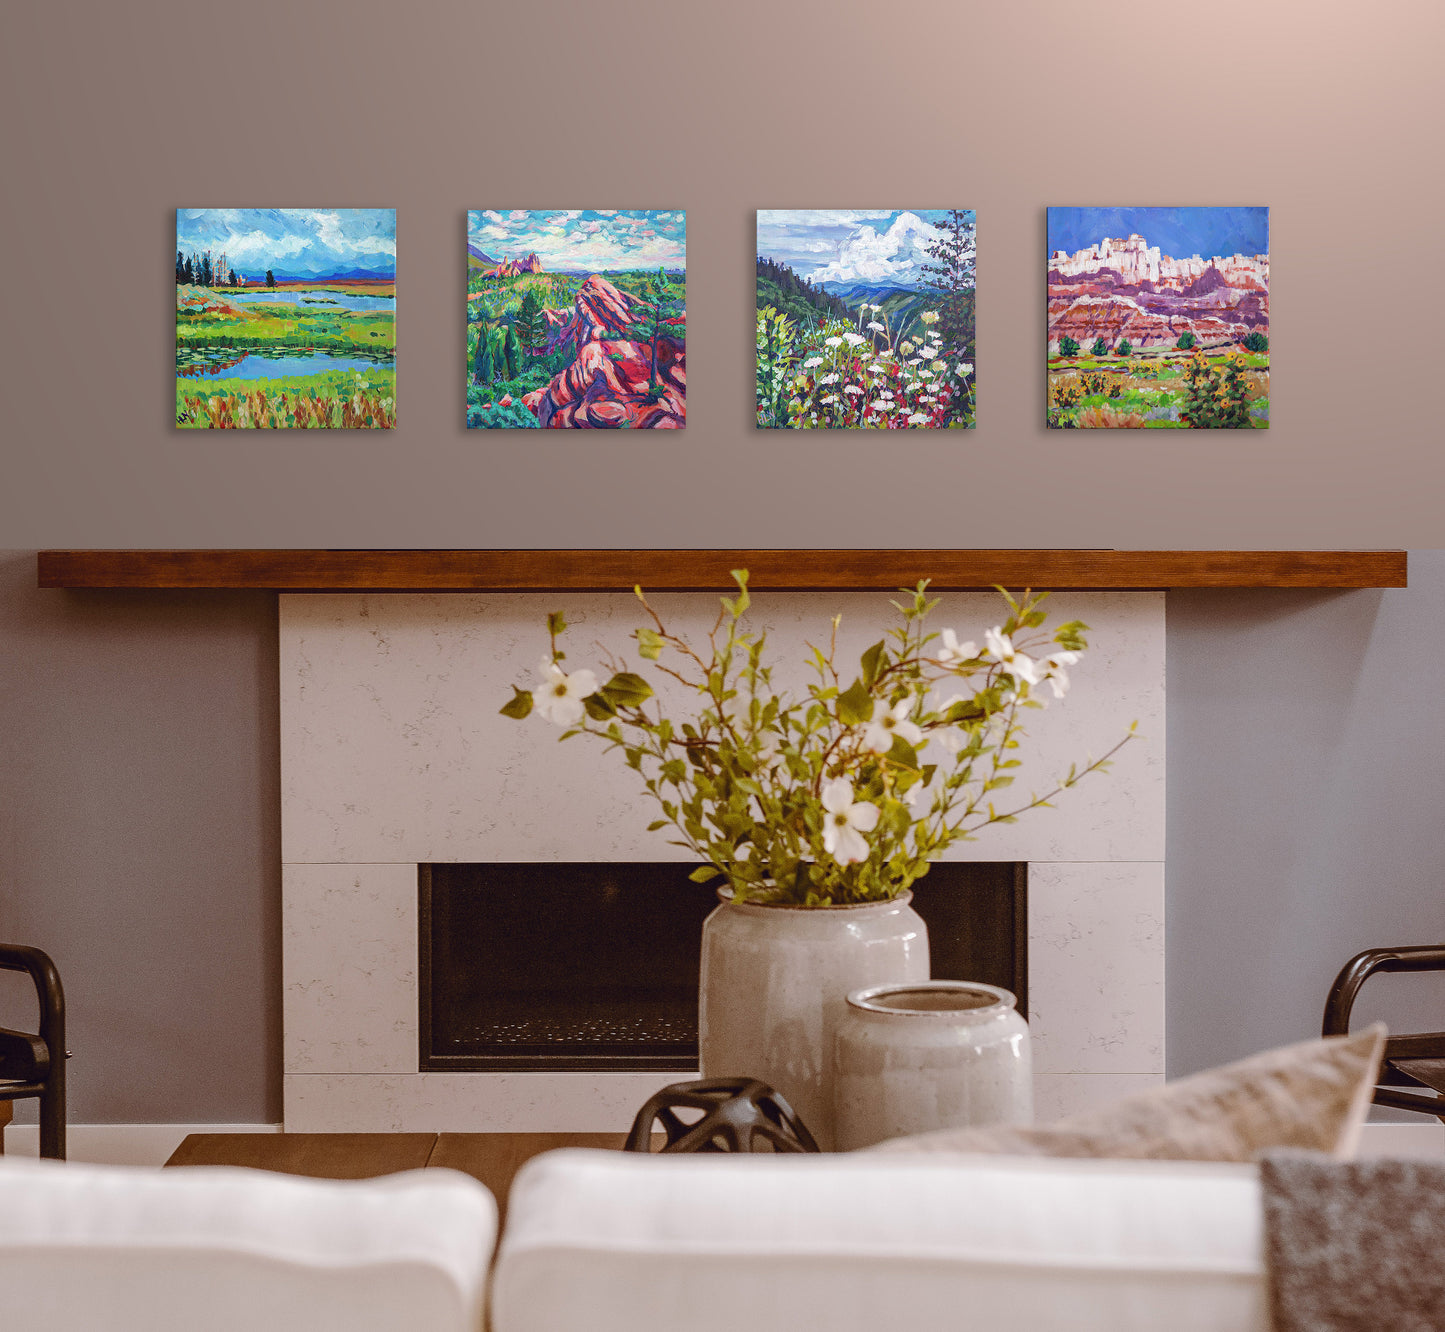 4 landscape paintings above fireplace